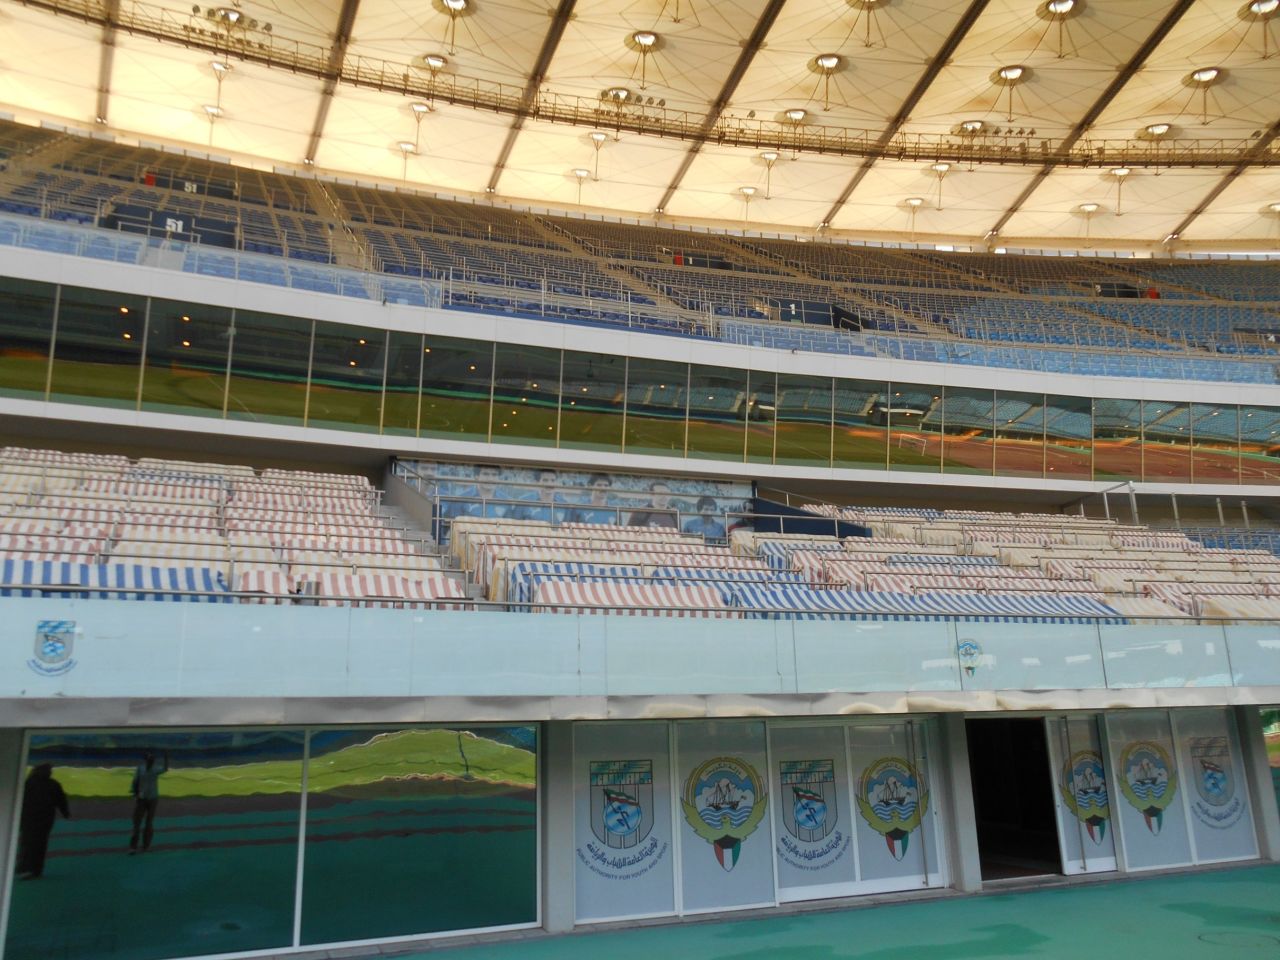 Once the stadium is finally ready, spectators will be well protected. Special care was taken when designing the arena with metal bars to separate each row as a security measure to prevent crowds overpowering each other or the police. A banner featuring Kuwait's 1982 World Cup qualifying team overlooks the pitch. 